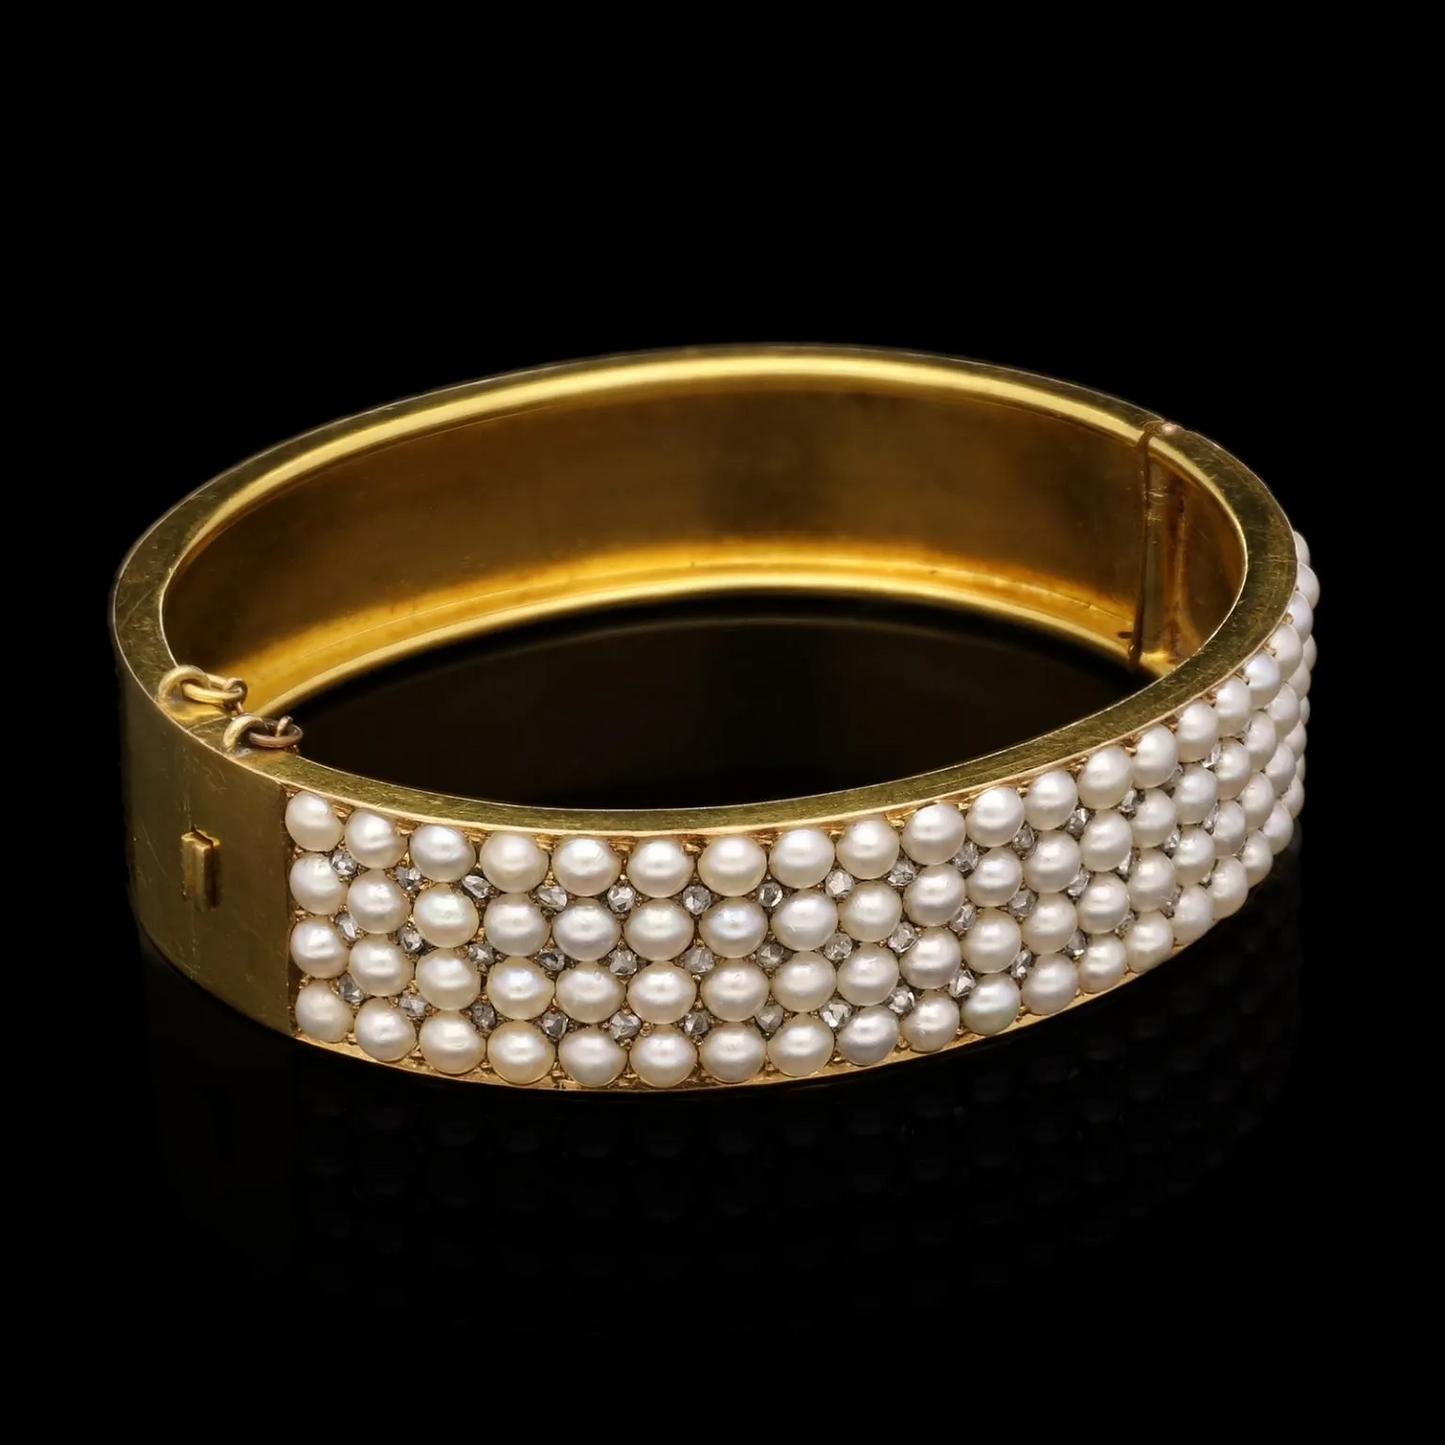 English Victorian 15KT Yellow Gold Pearl & Diamond Bangle Bracelet front side view